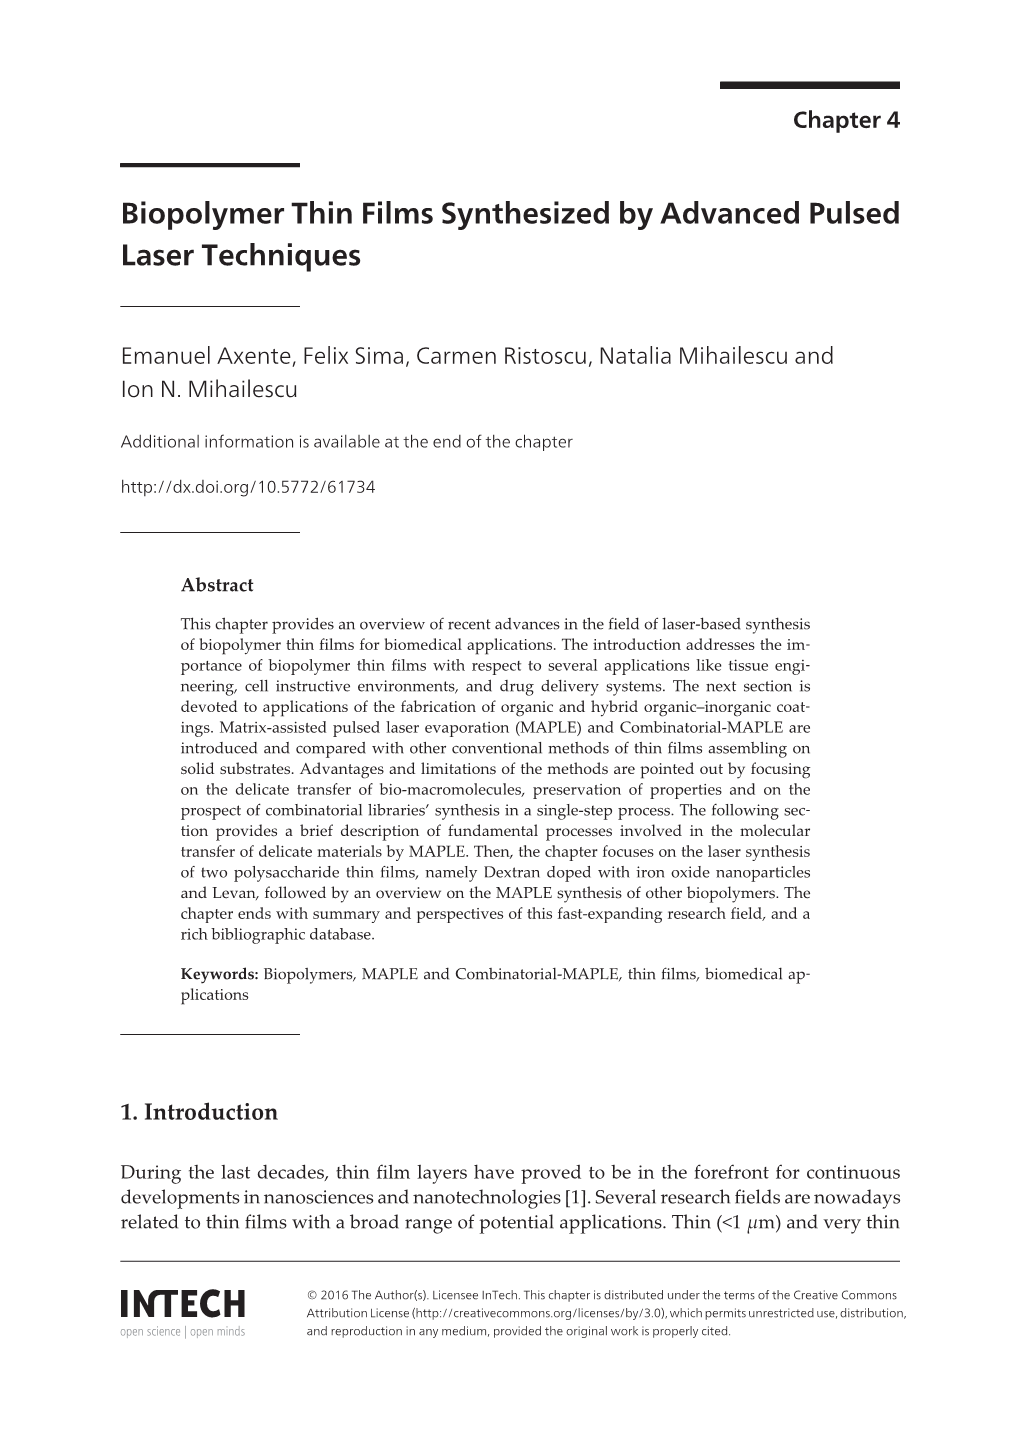 Biopolymer Thin Films Synthesized by Advanced Pulsed Laser Techniques